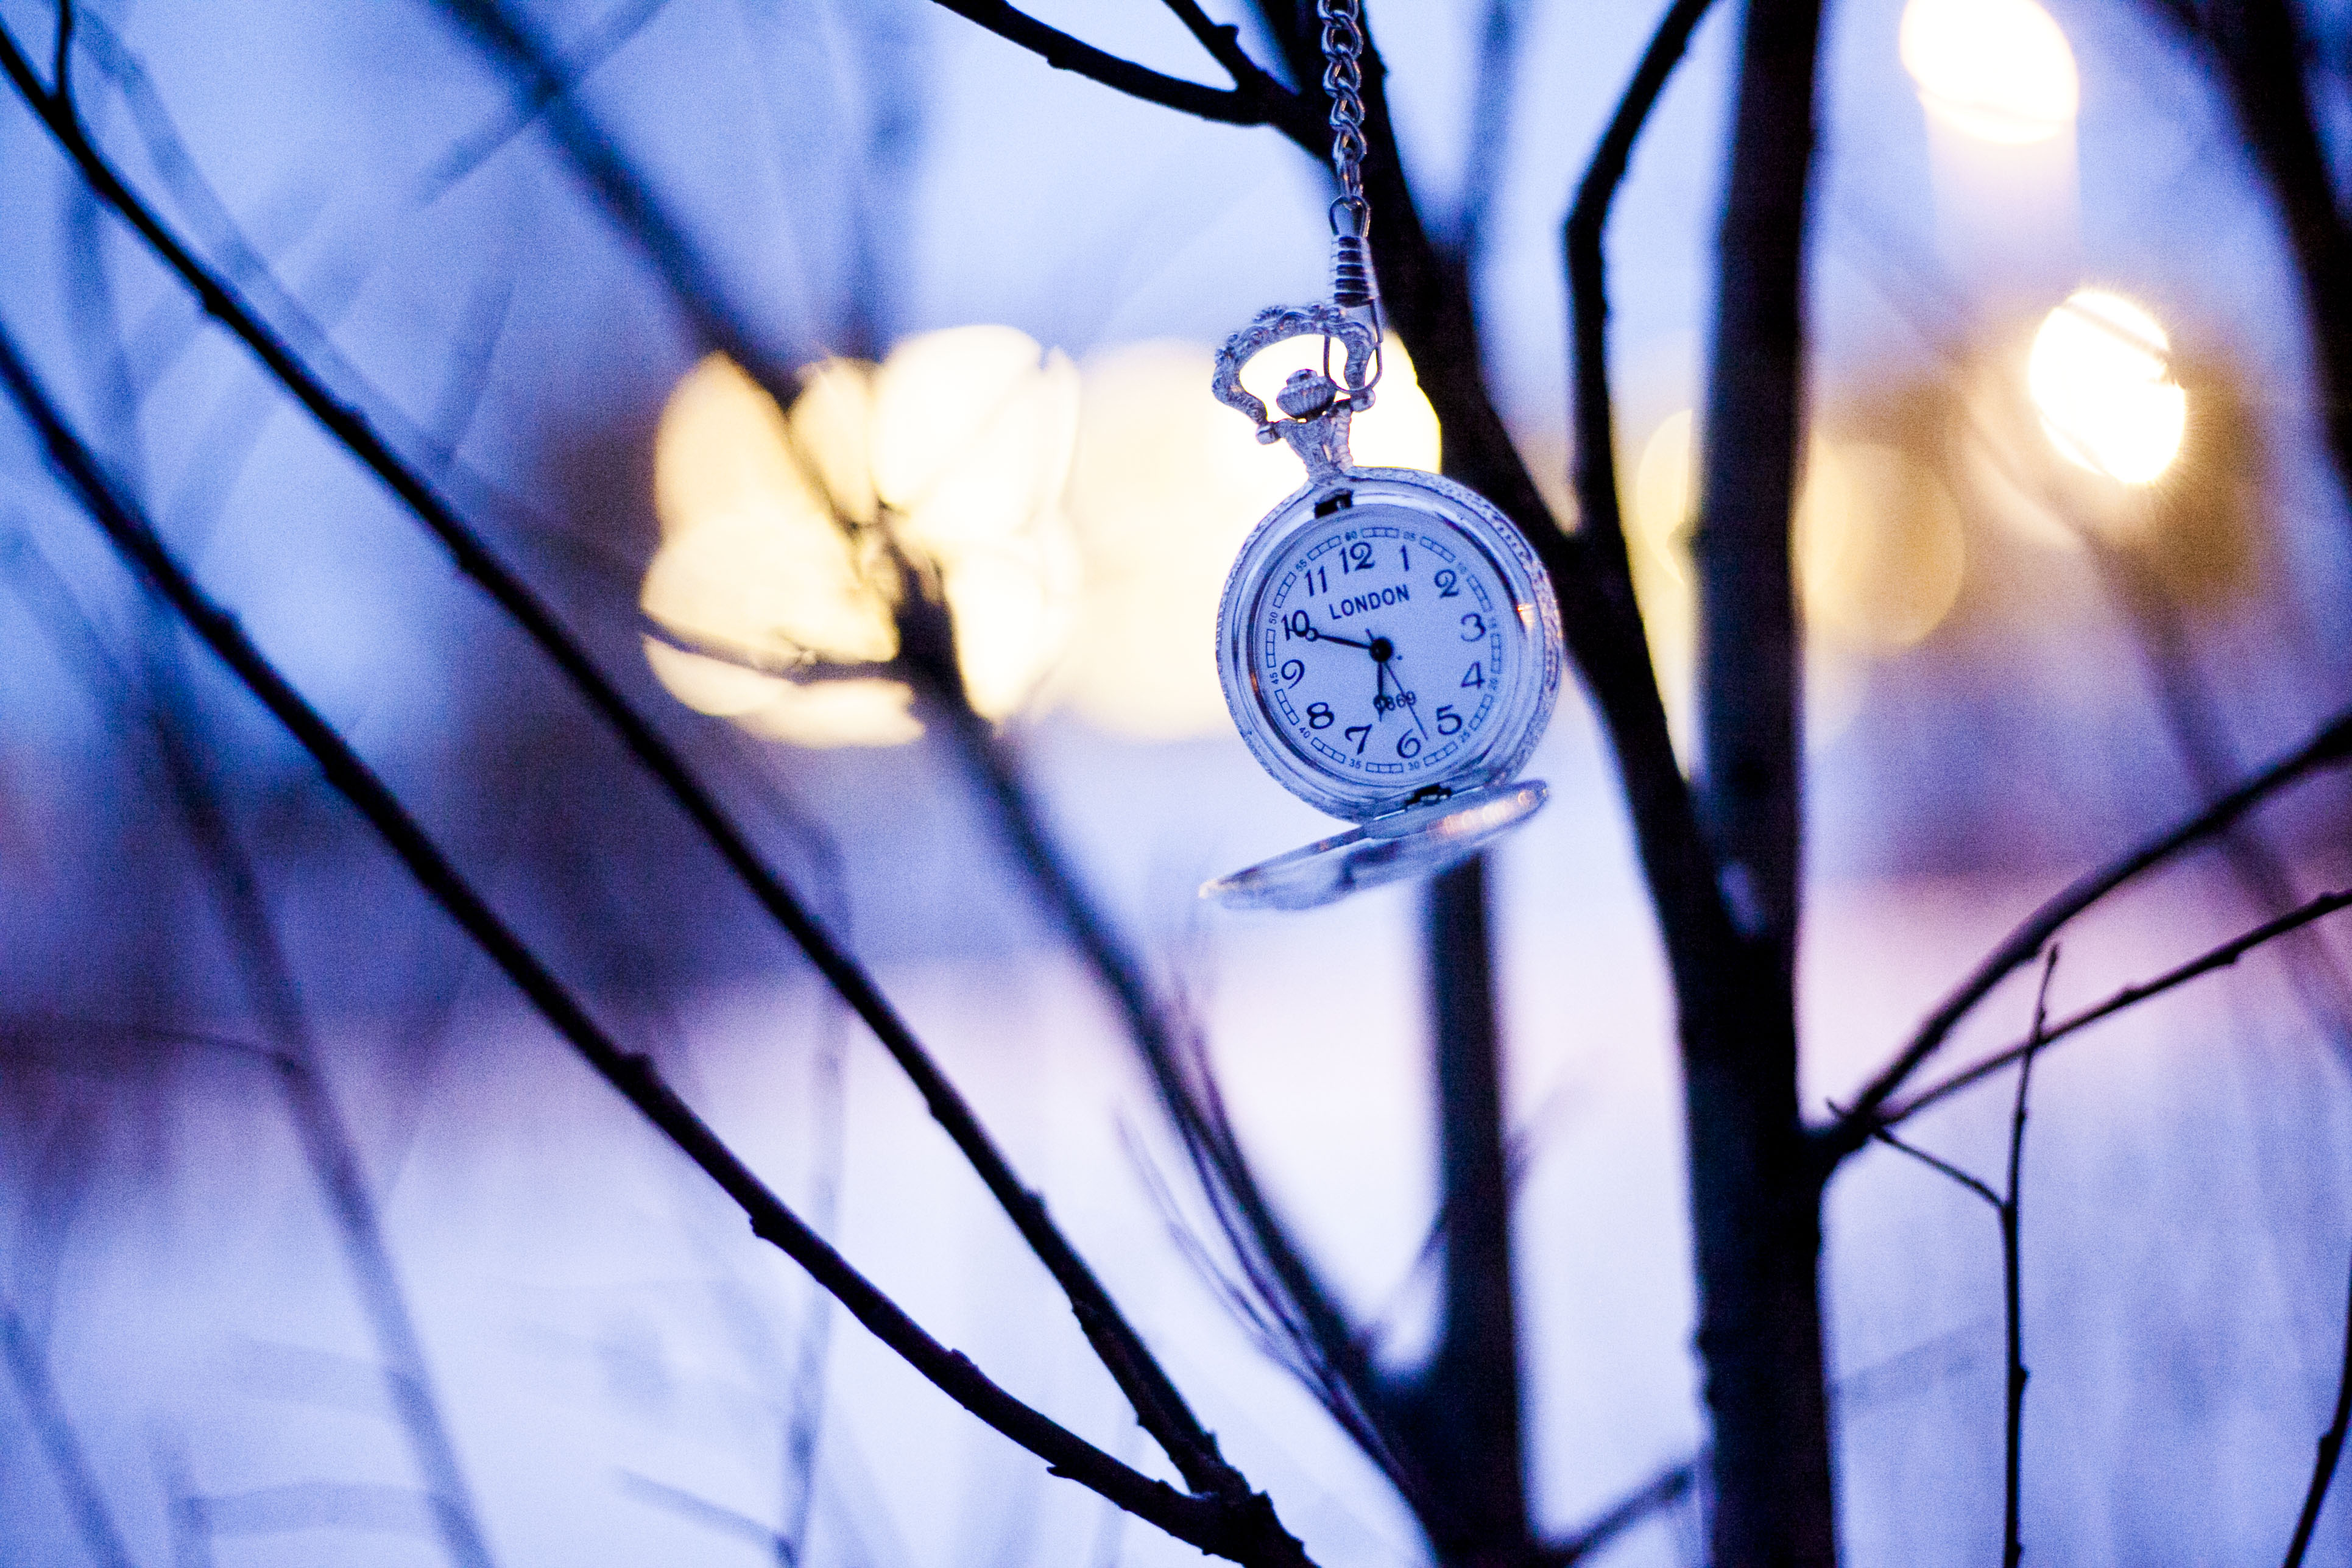 100216 download wallpaper winter, clock, miscellanea, miscellaneous, branches, pocket watch screensavers and pictures for free